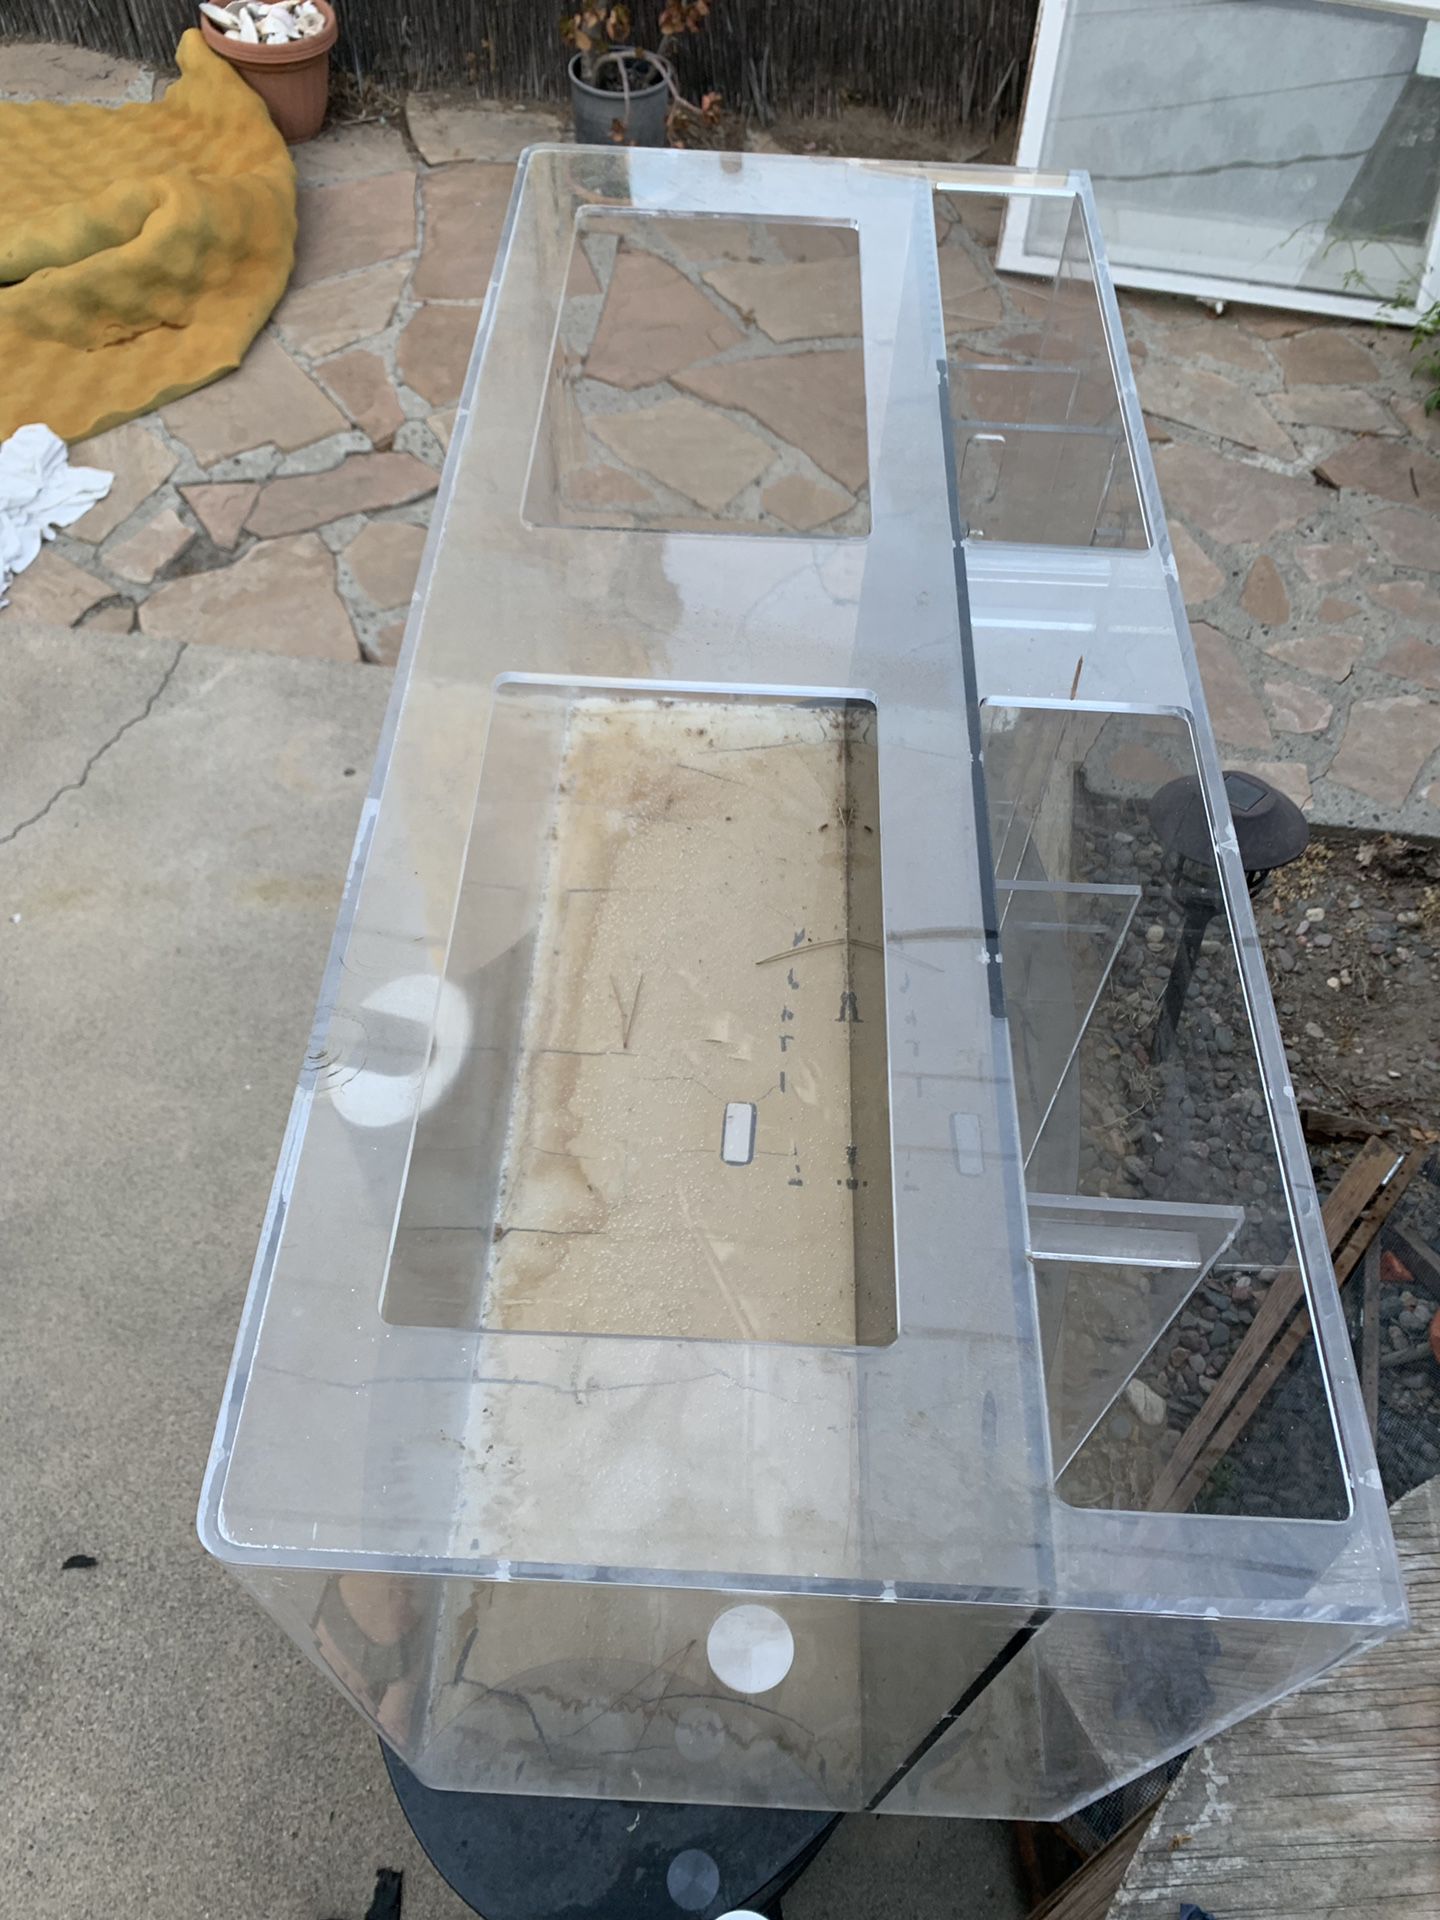 50 gallon acrylic all in one fish tank aquarium. Sump built in back. Crystal clear